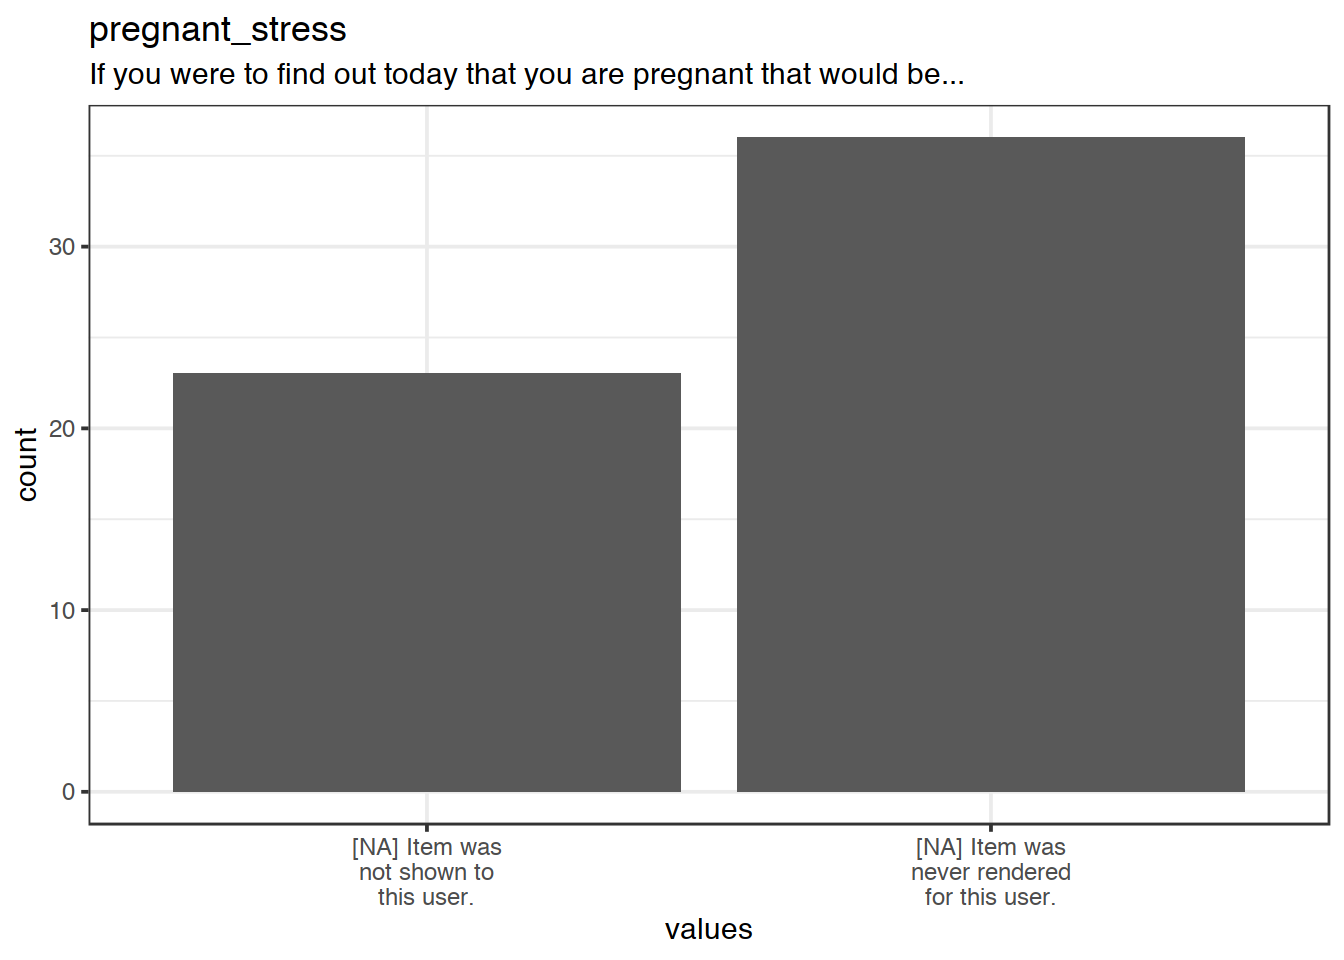 Plot of missing values for pregnant_stress